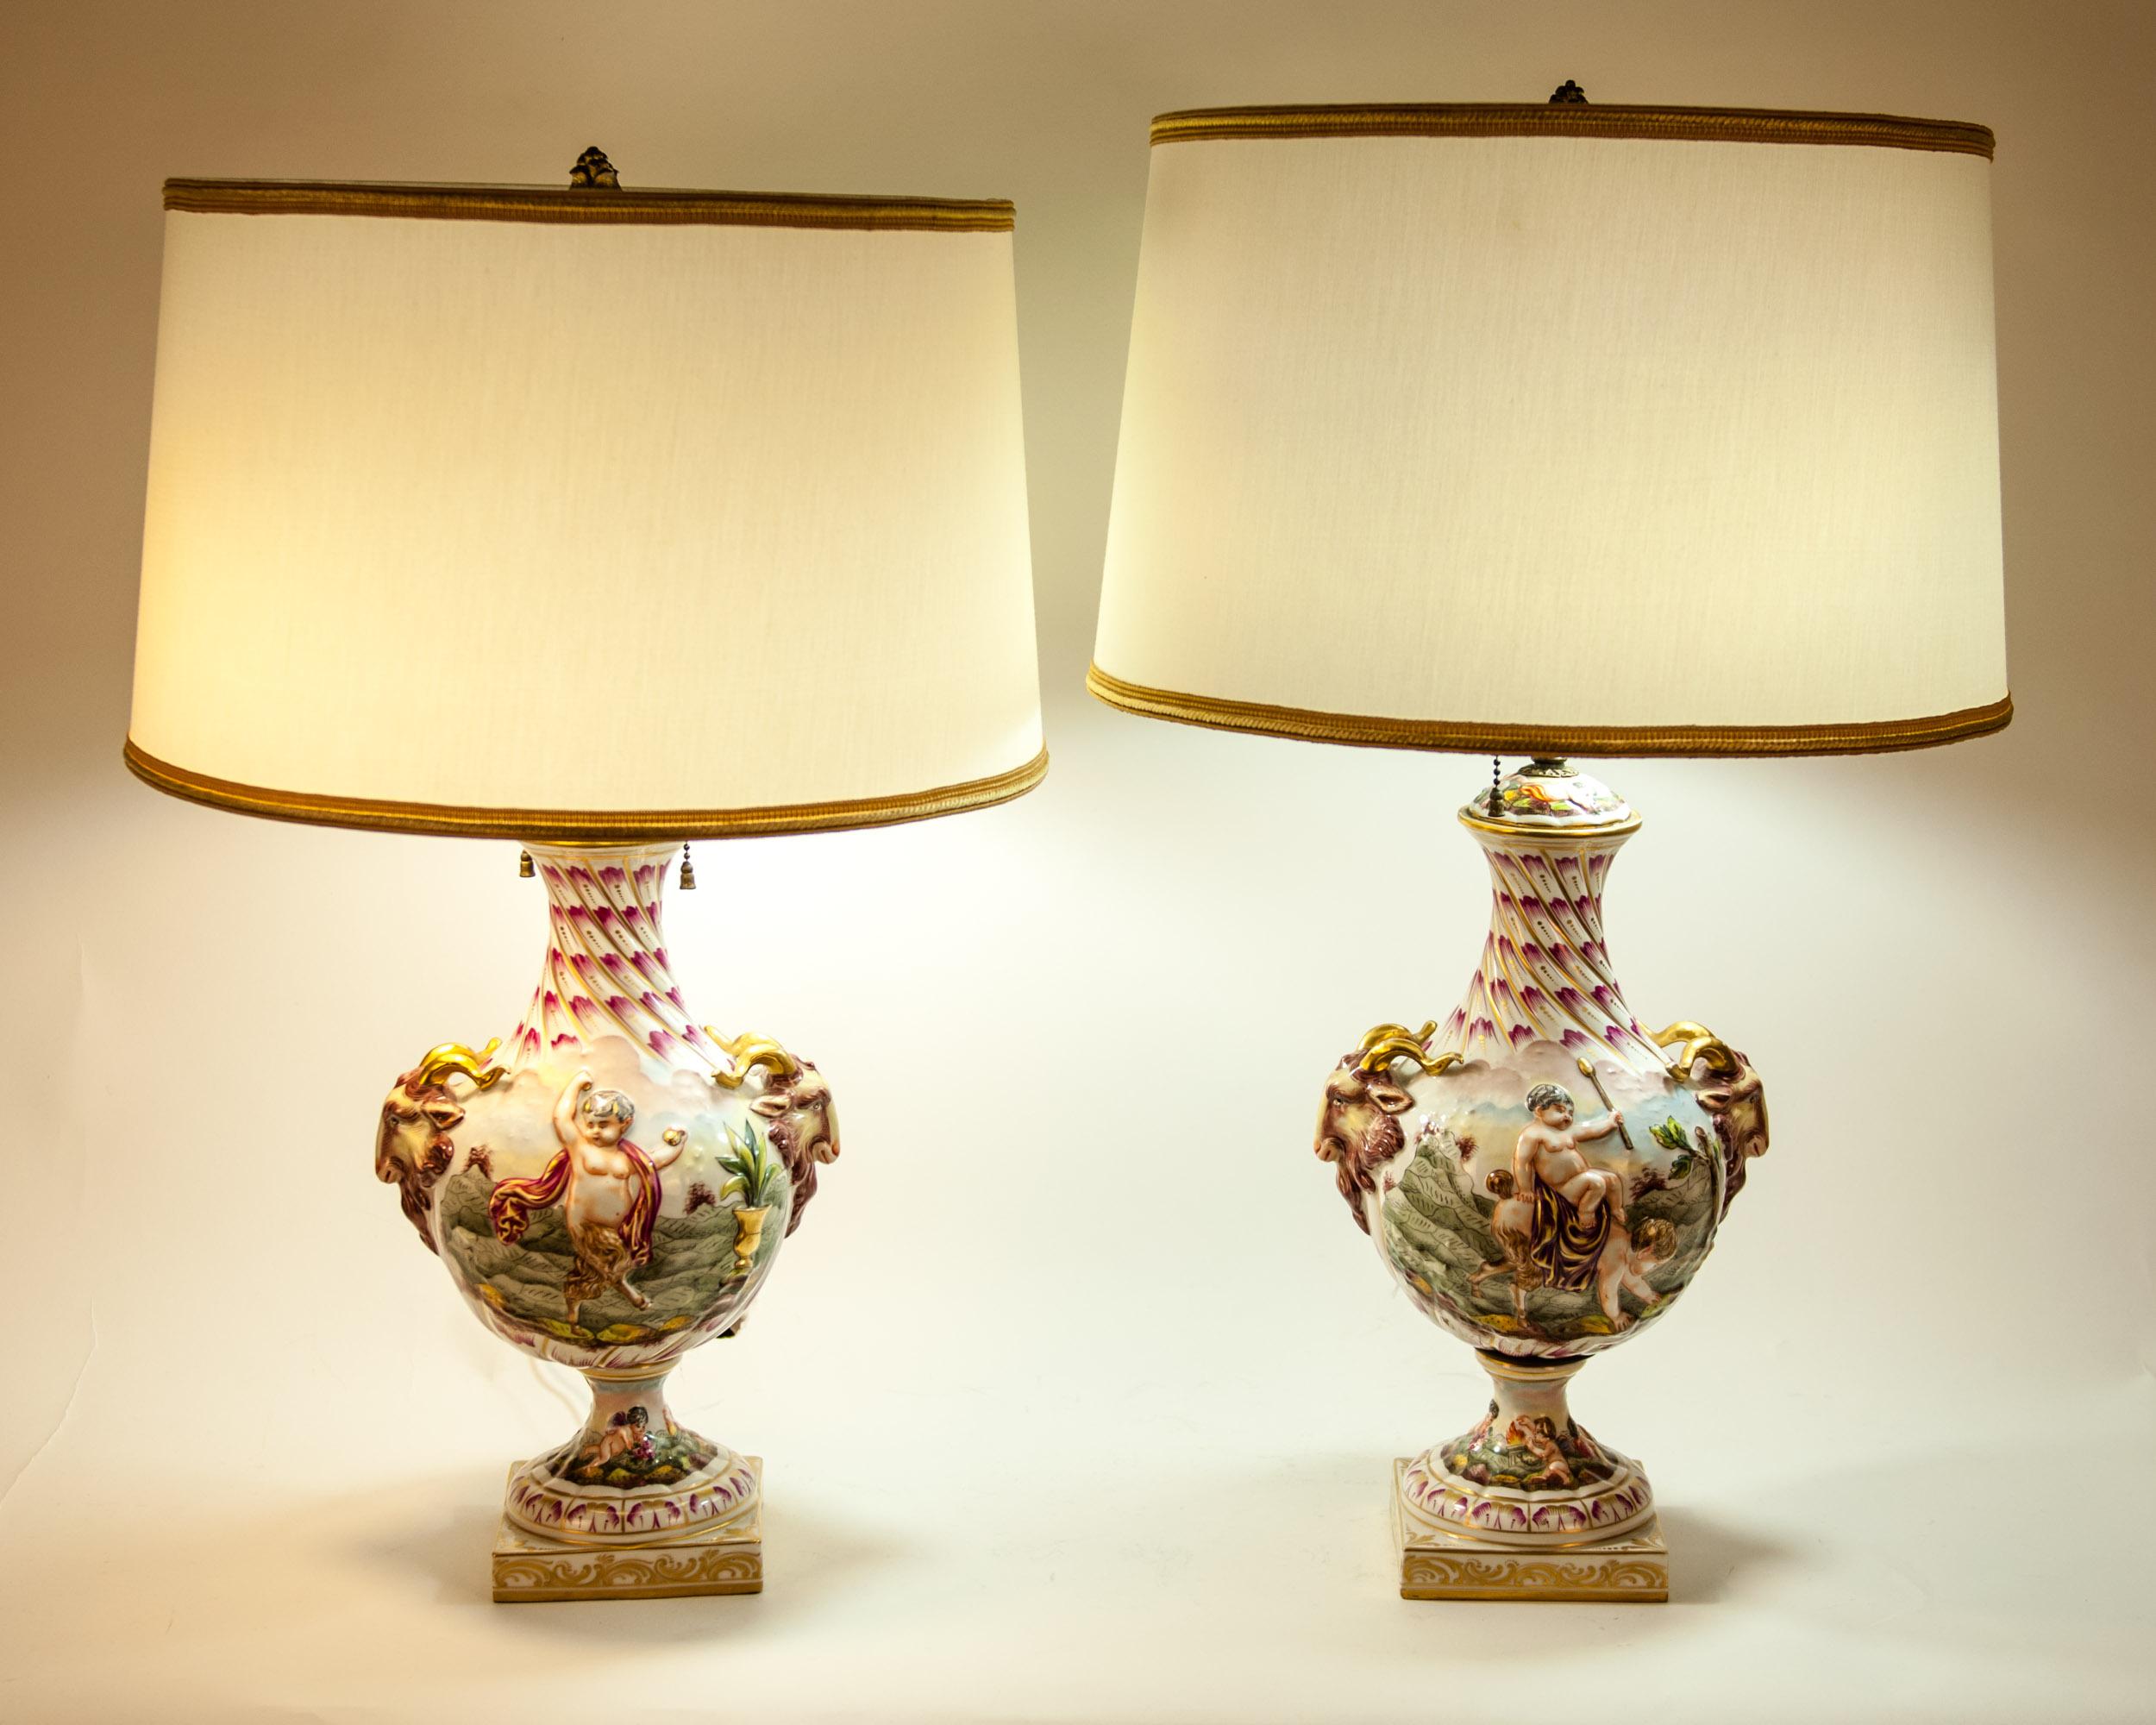 Early 20th century porcelain pair of table lamp with adjustable finial. Each lamp is in great vintage working condition. Maker's mark undersigned. Each lamp measure about 23.5 inches high x 9 inches diameter. Each lamp come with a round silk